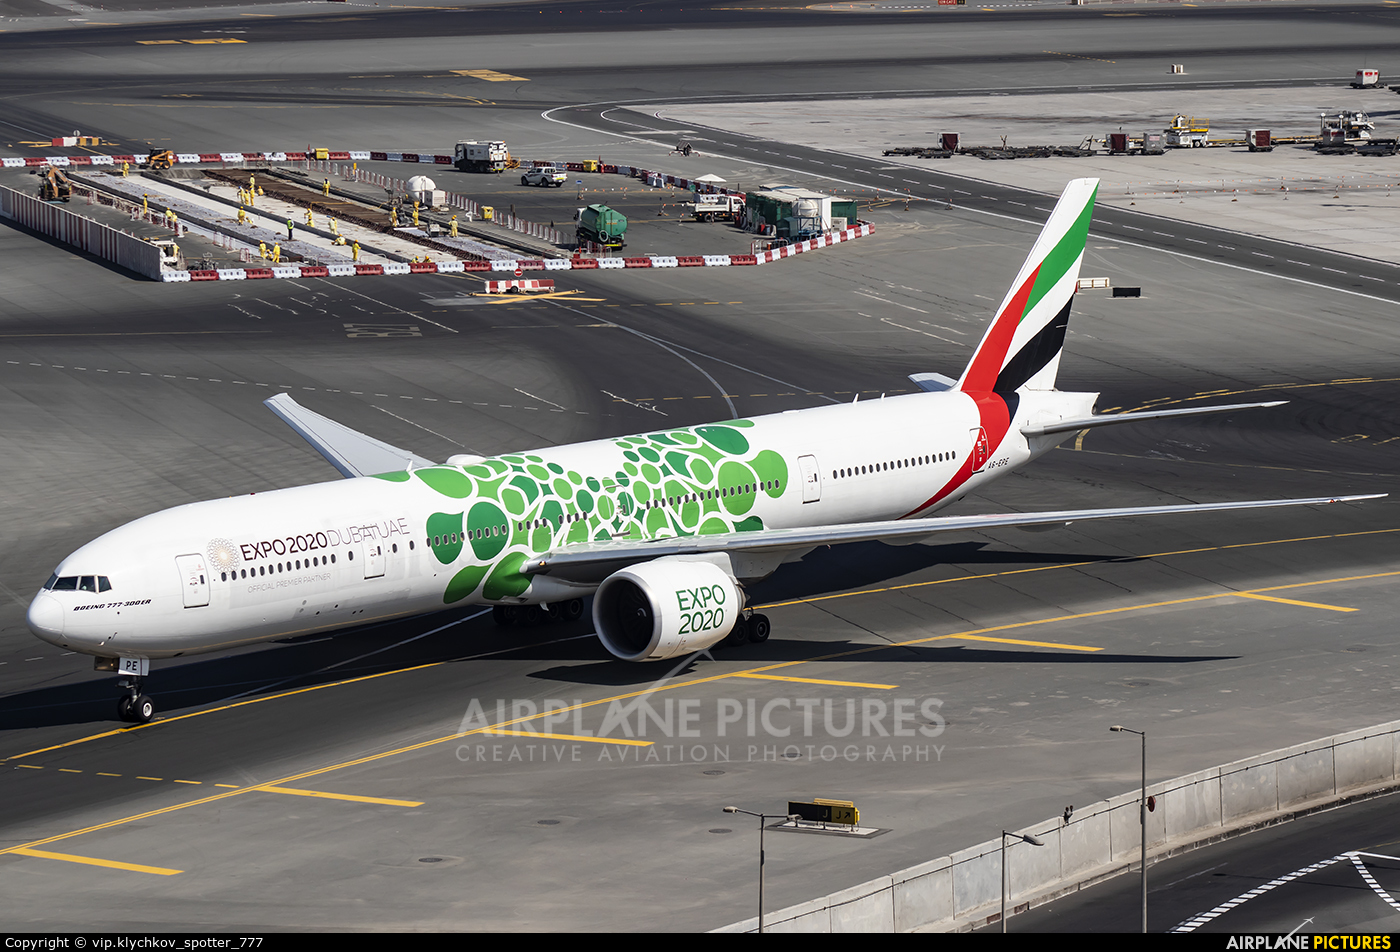 Emirates Airlines A6-EPE aircraft at Dubai Intl